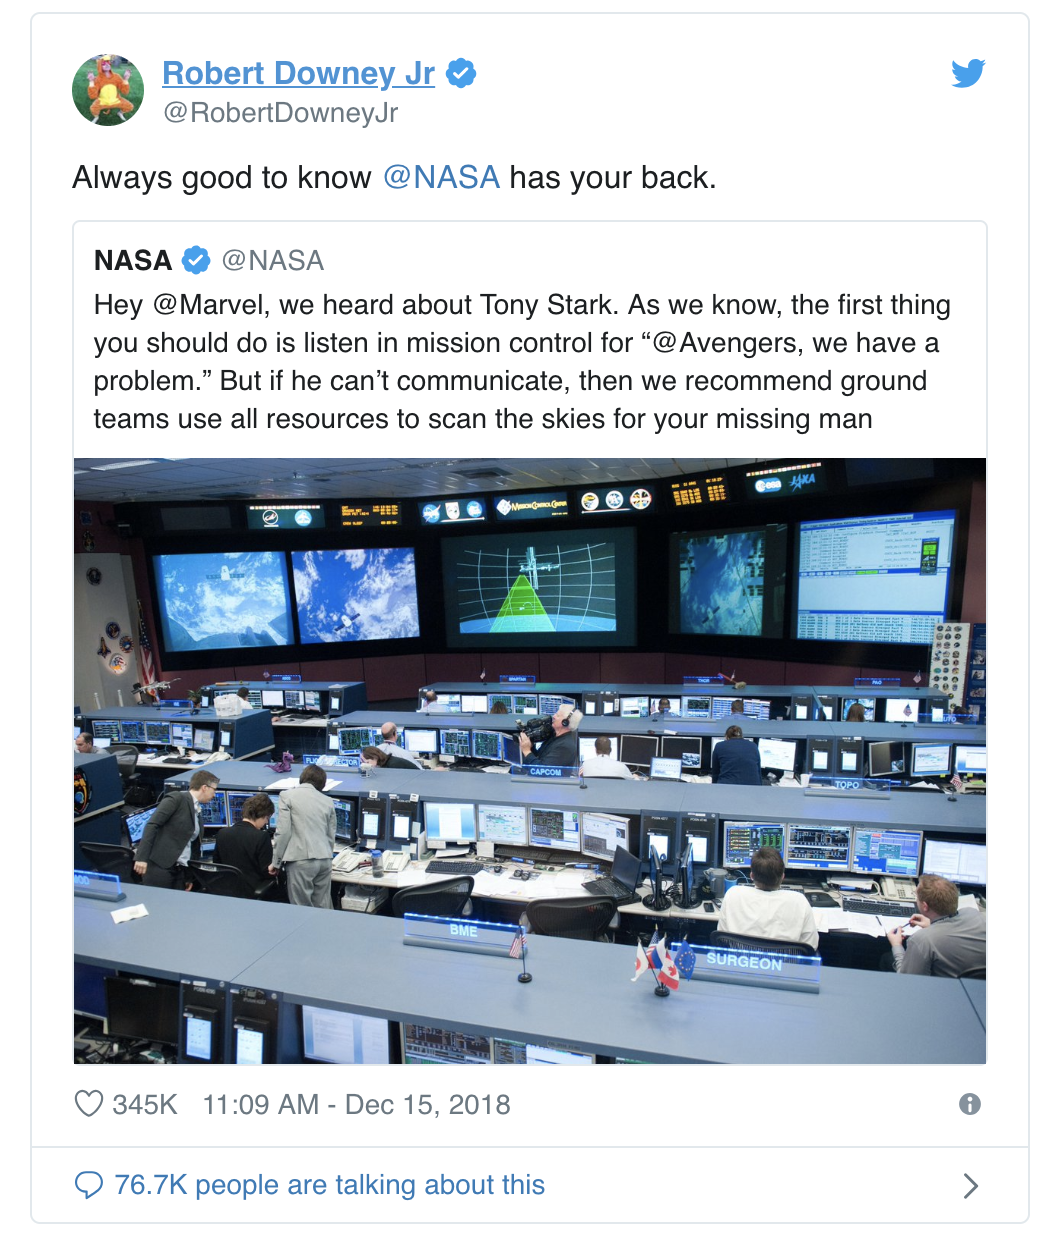 Tweet from Robert Downey Jr. that says "Always good to NASA has your back."